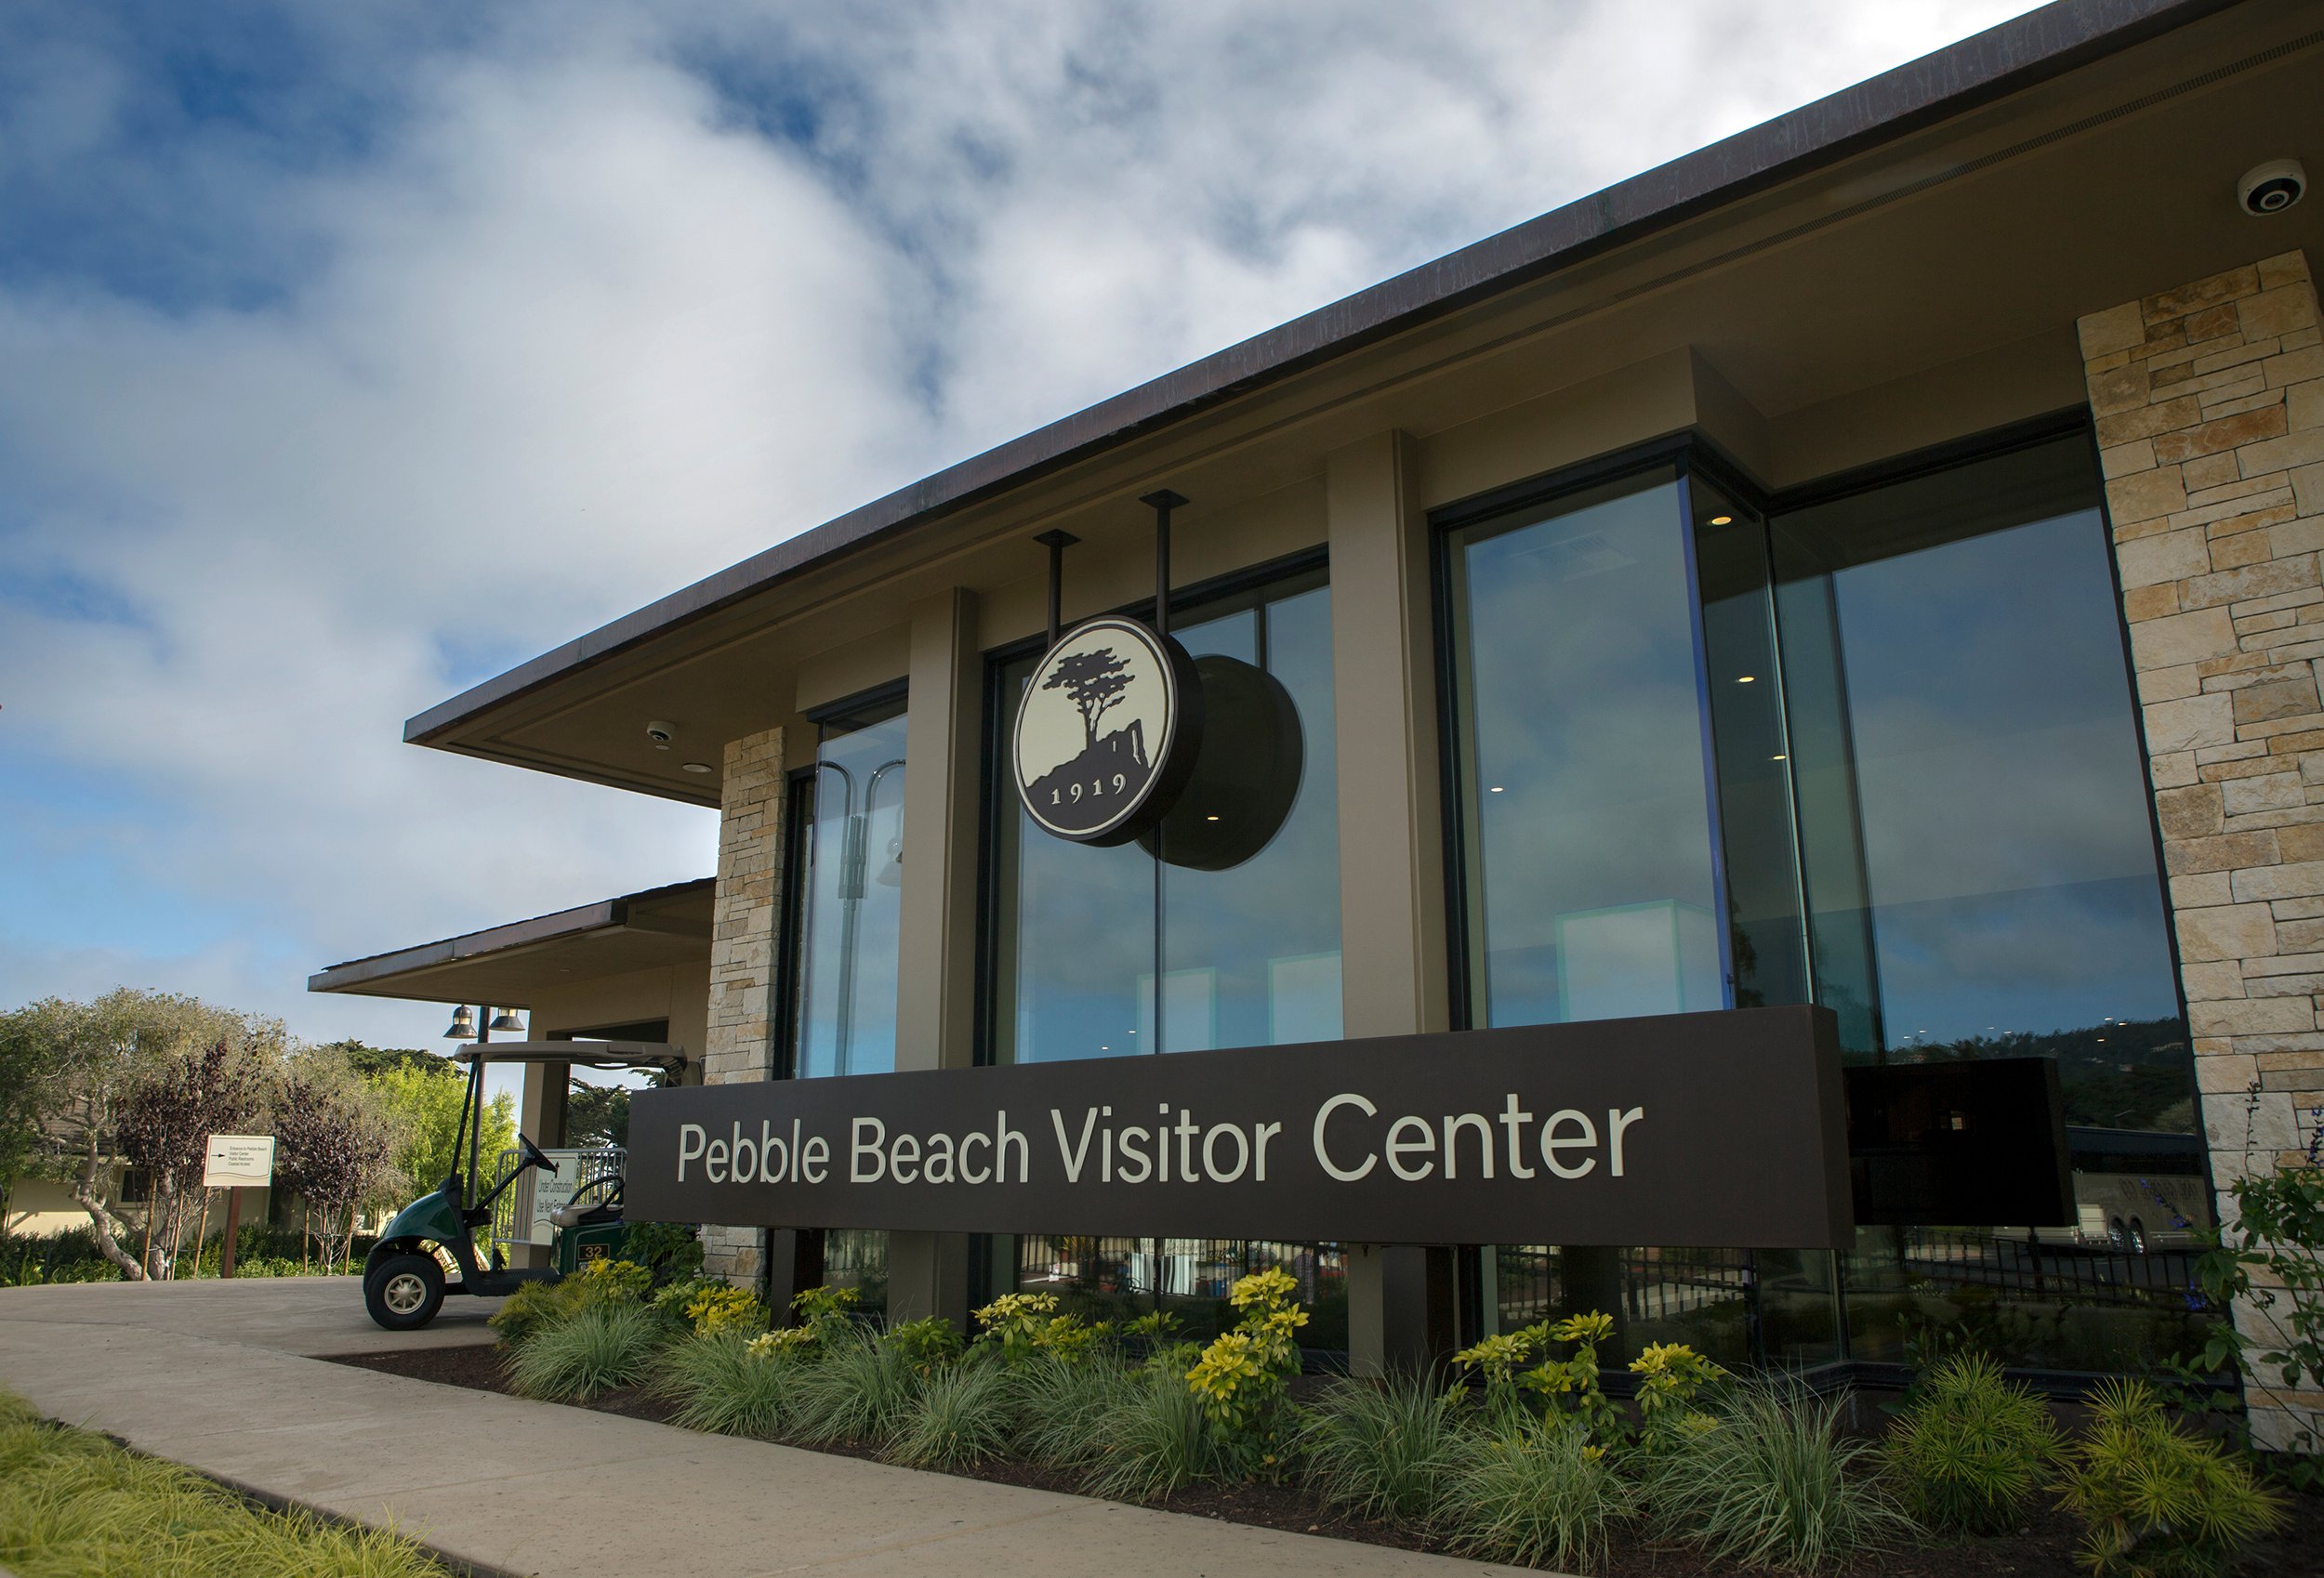 Pebble Beach Visitor Center on 17-Mile Drive